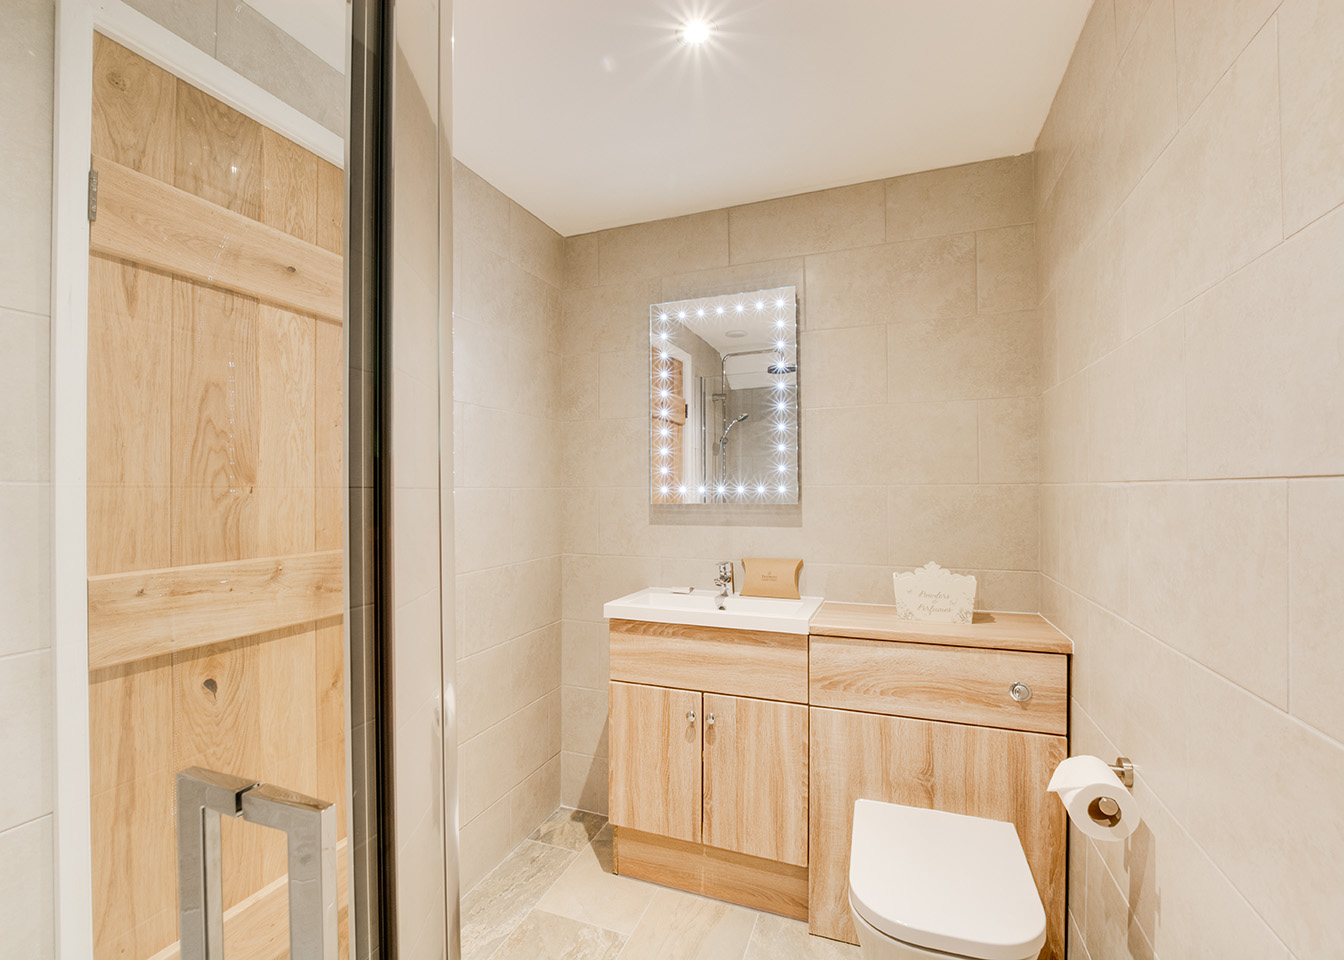 Bathroom 1 of Troutstream luxury self catering converted barn holiday cottage at Penrose Burden in North Cornwall 01.jpg